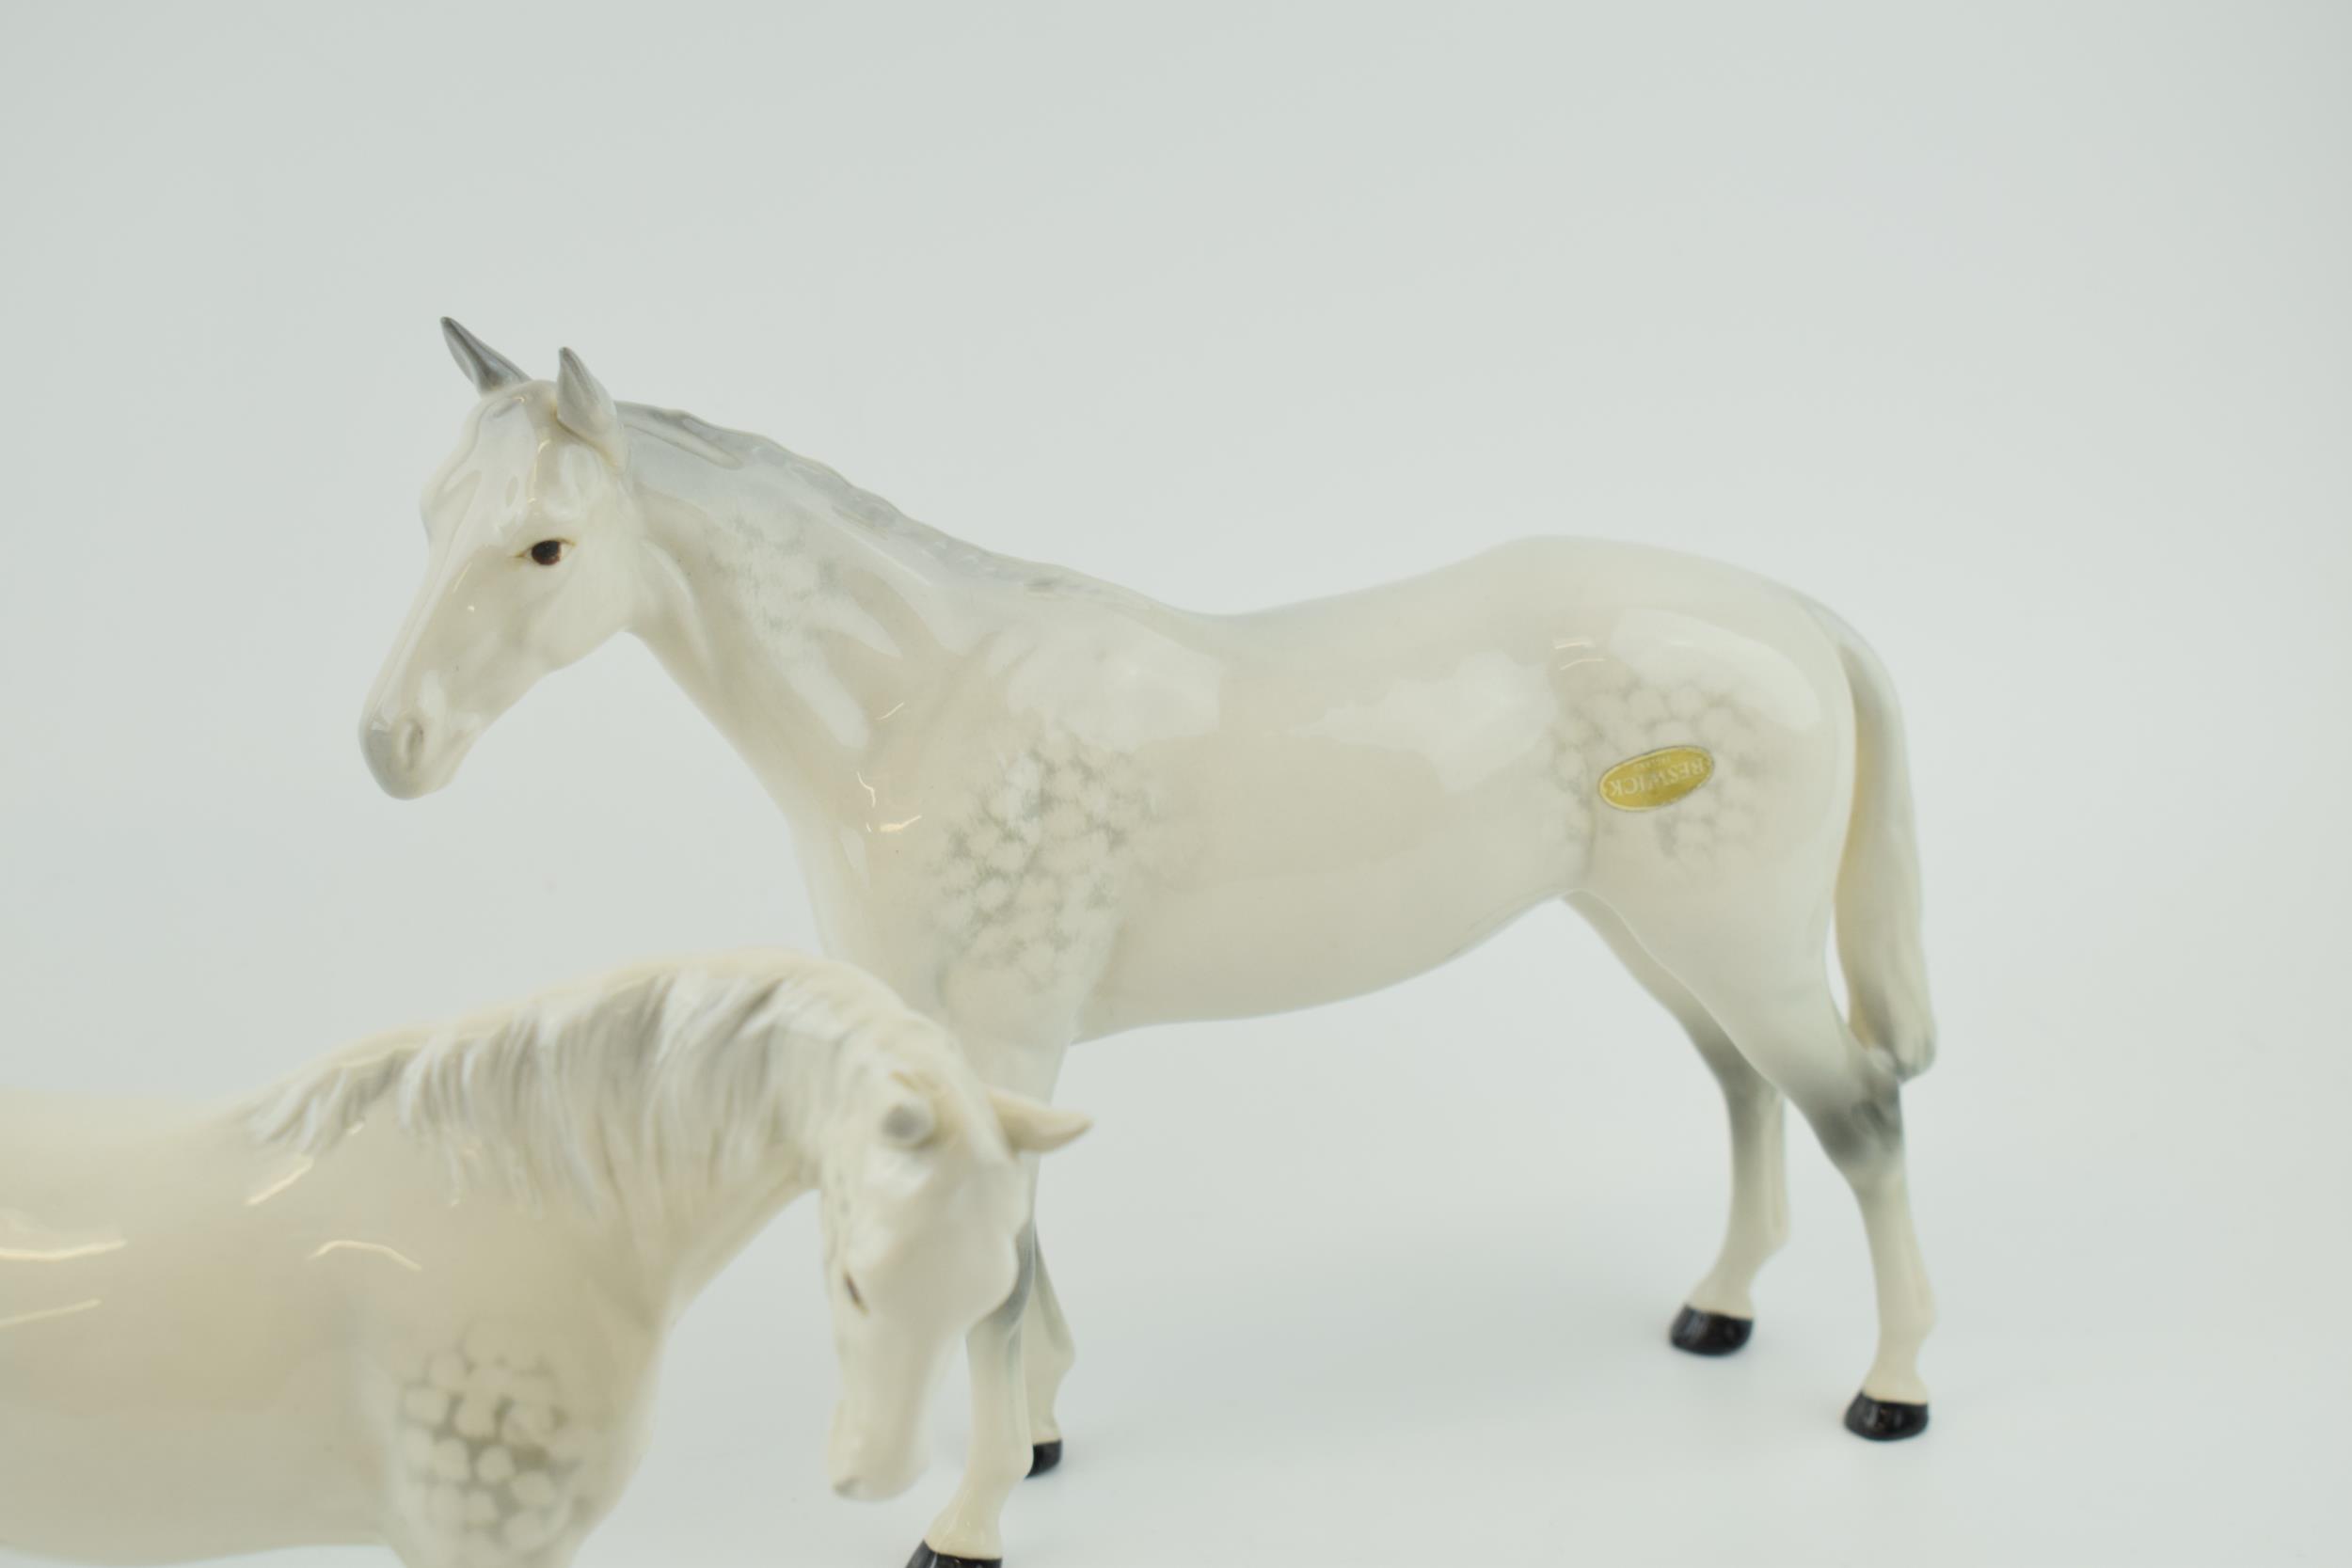 Beswick grey imperial with grey swishtrail and grey mare facing right (3). In good condition with no - Image 3 of 4